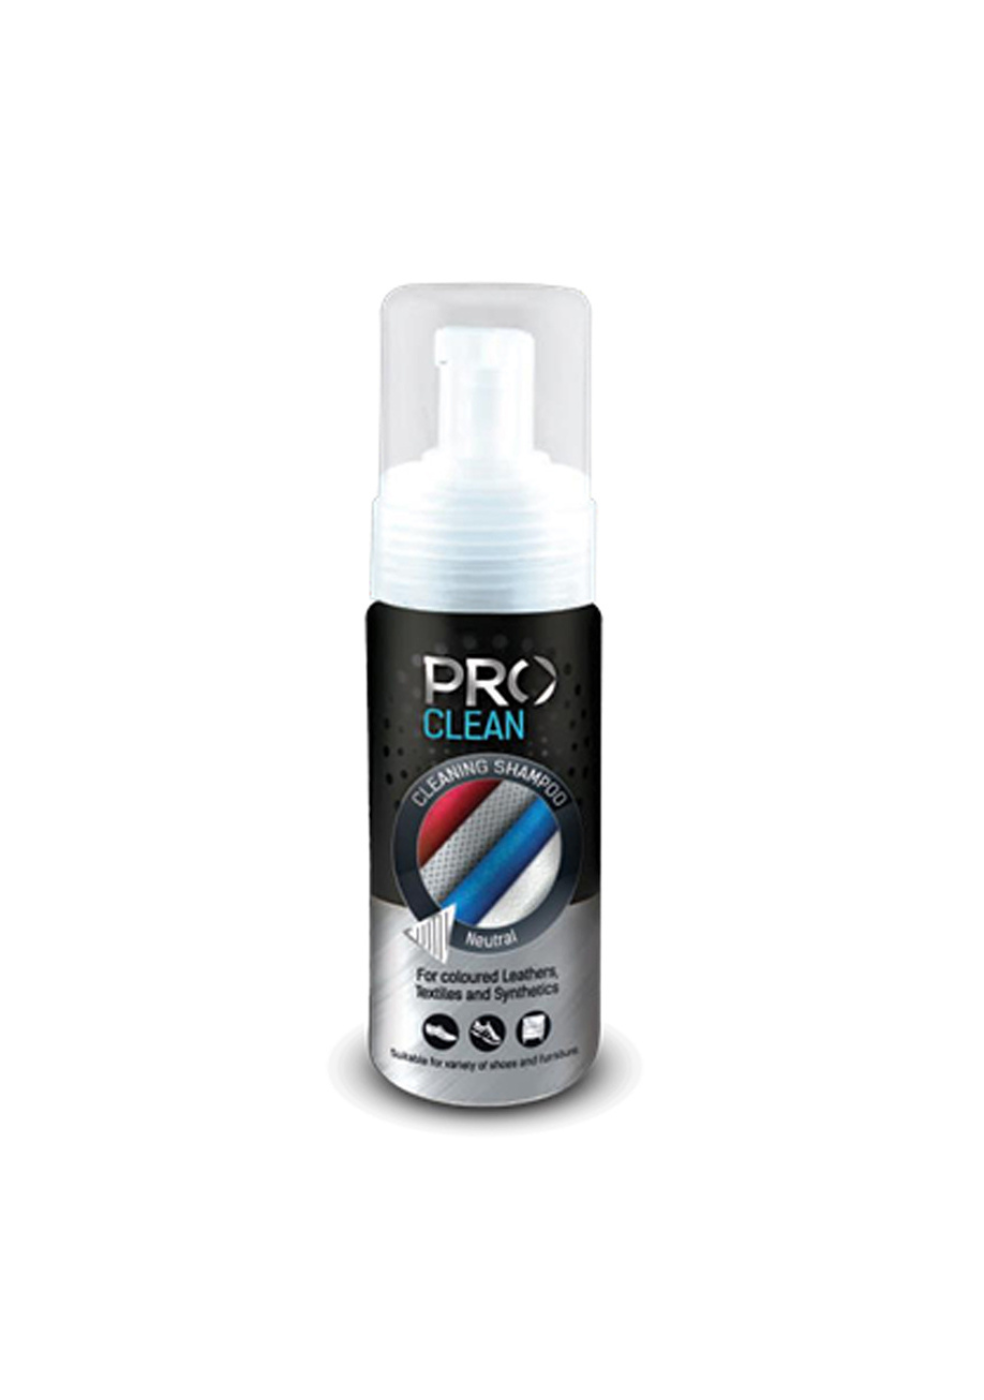 PRO White Shoe Clean Cleaning Shampoo